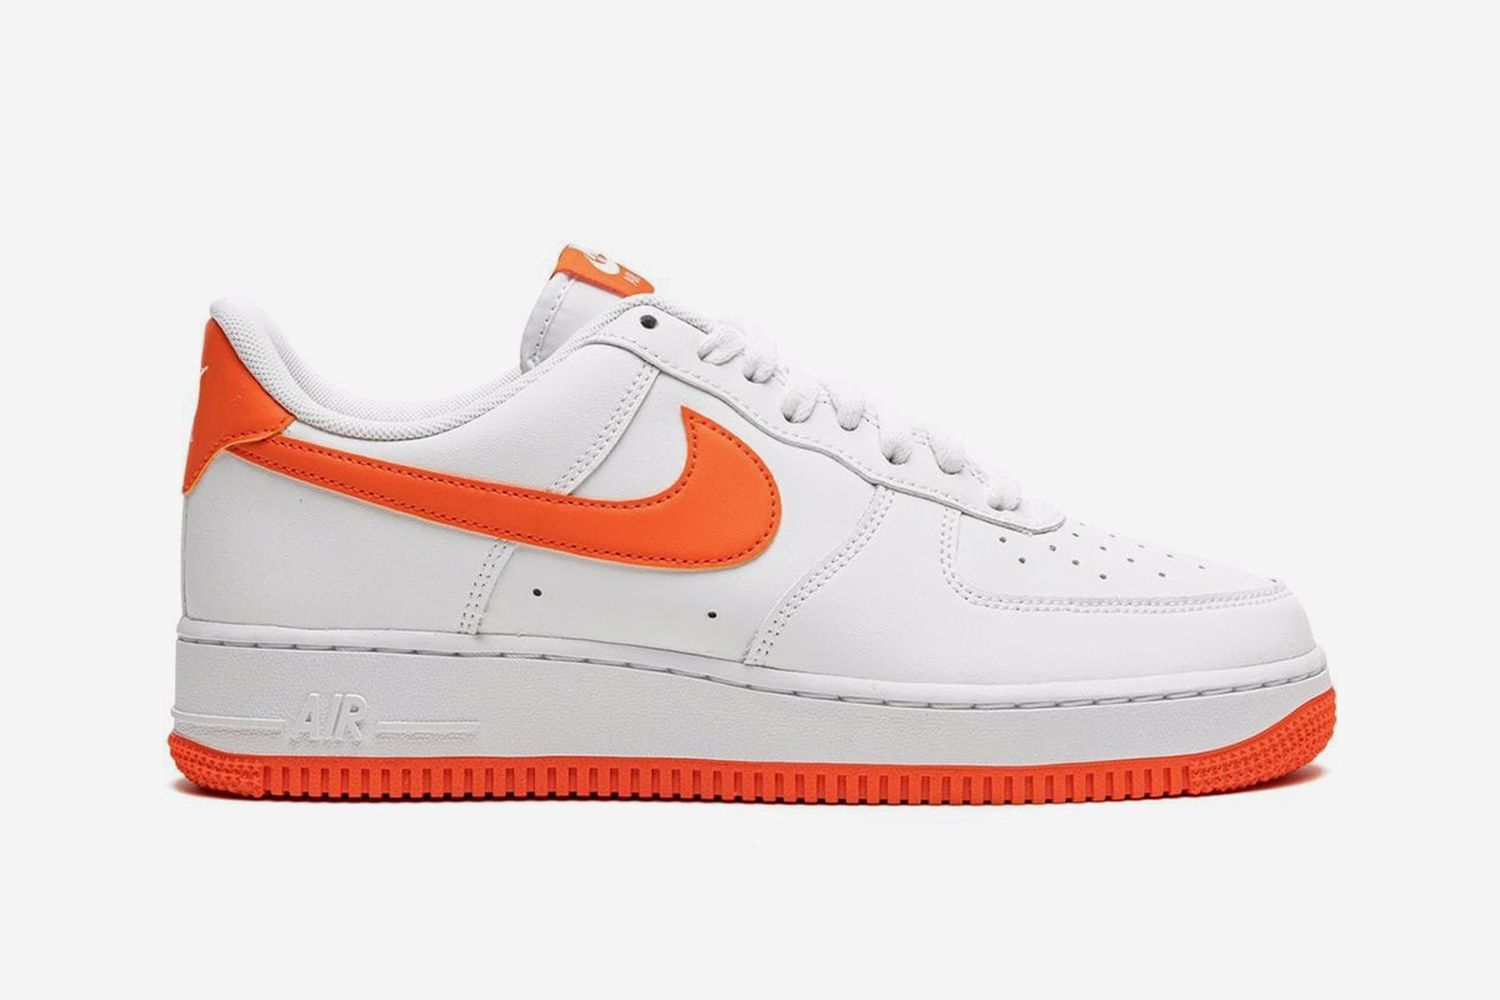 11 Classic Sneakers That Should Be in Any Collection